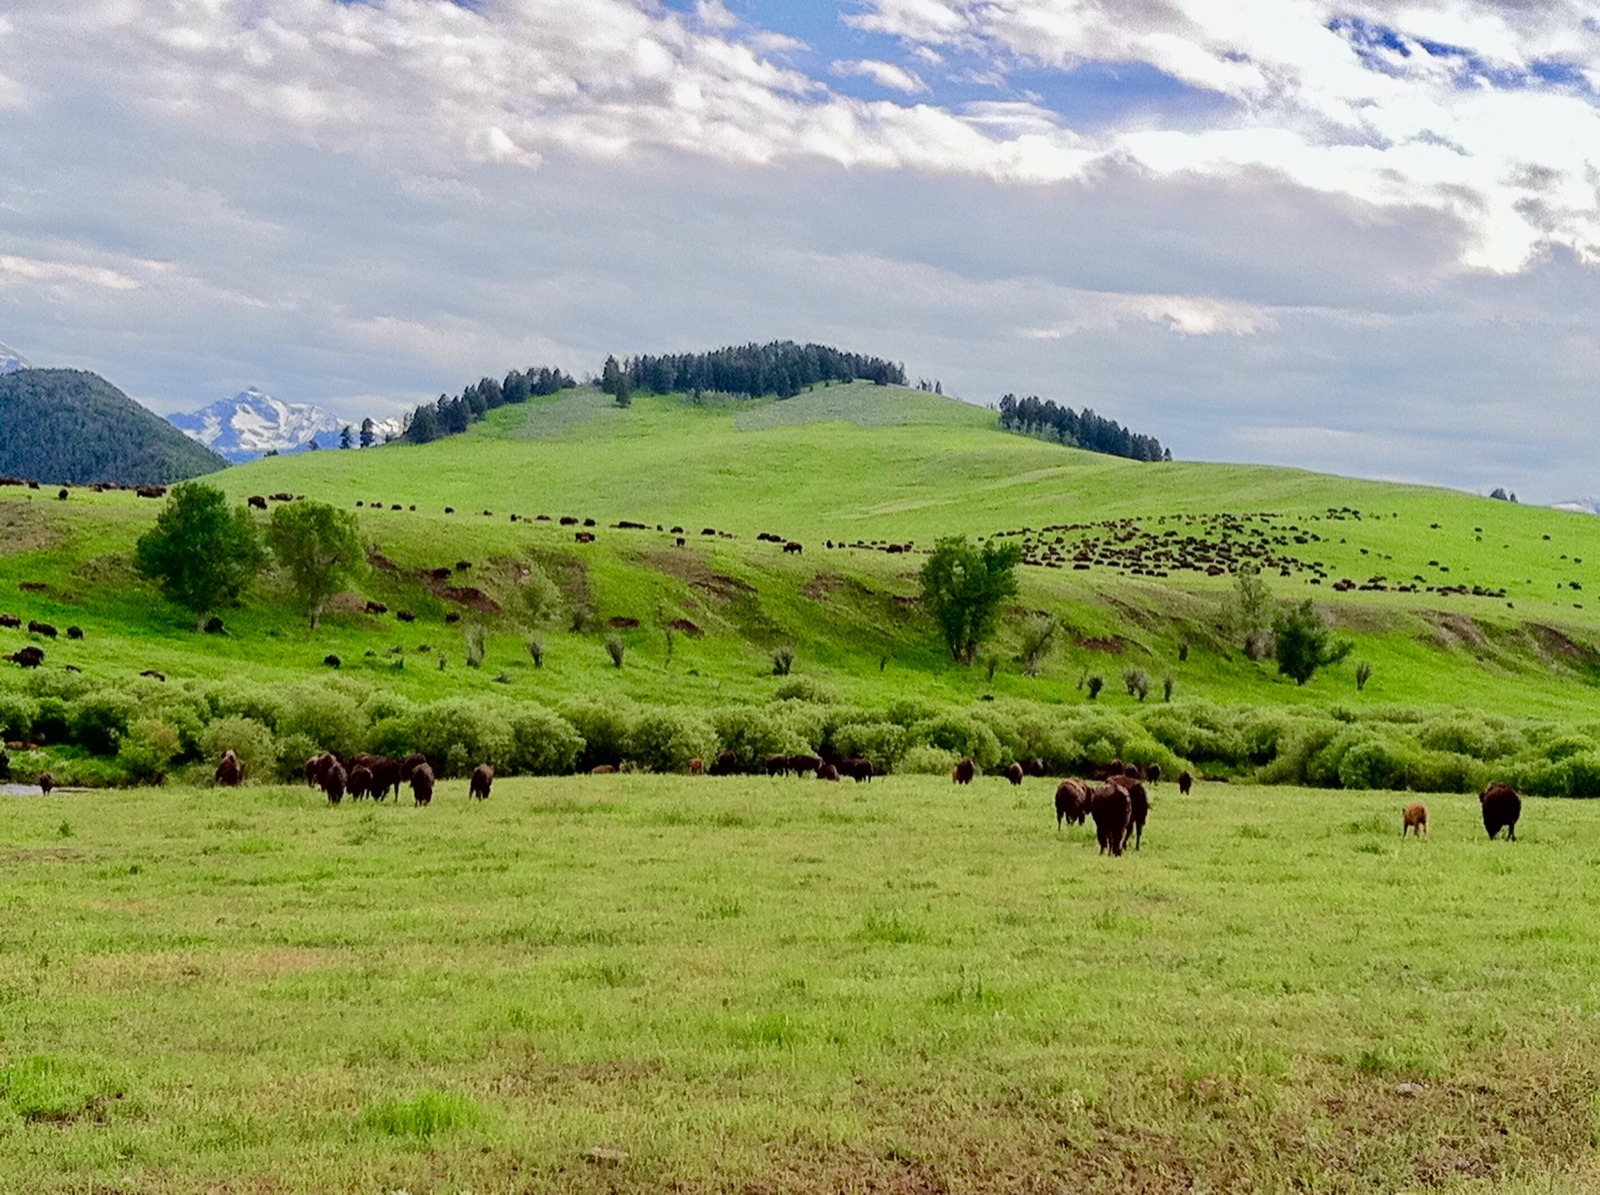 Some of the 5,000 bison that roam across Ted Turner's Flying D Ranch. Photo by Todd Wilkinson